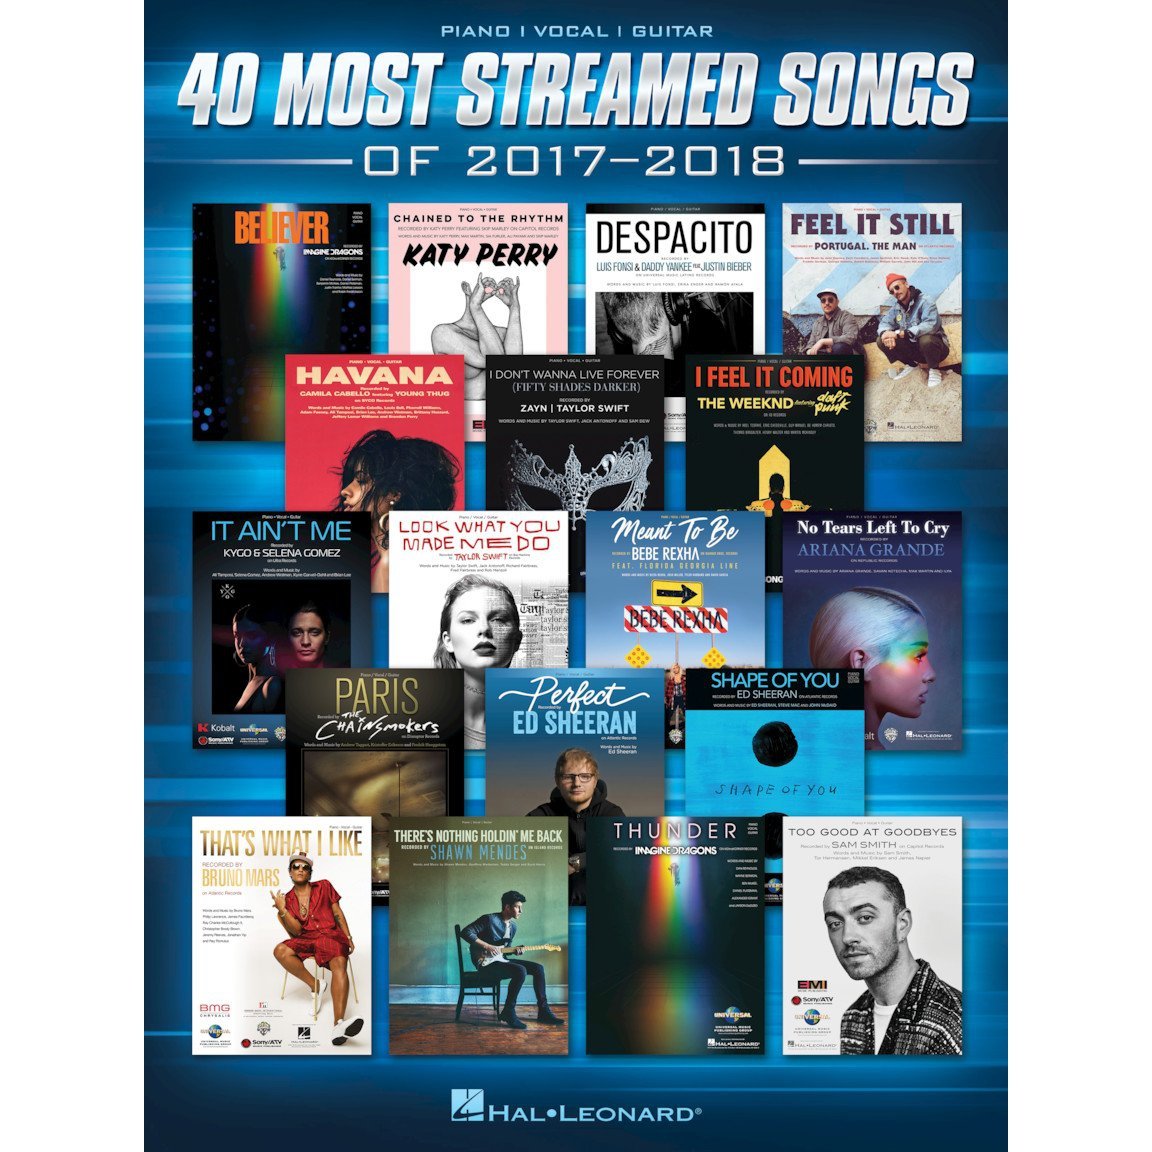 Hal Leonard HL14032 40 Most Streamed Songs of 2017-2018 Piano/Vocal/Guitar-Music World Academy